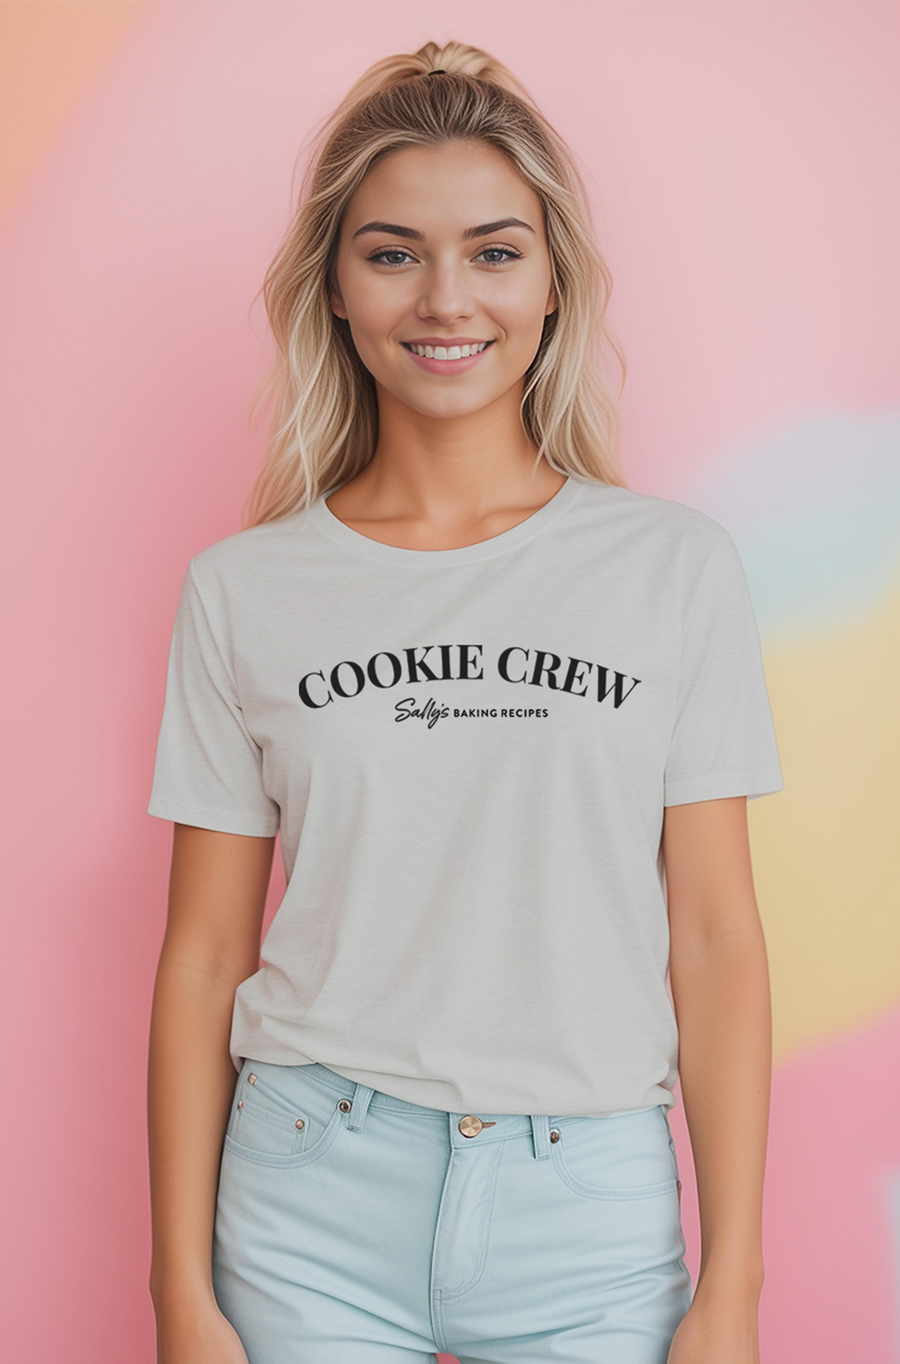 Cookie Crew-Sally's Baking Recipes- Unisex Athletic Gray Shirt